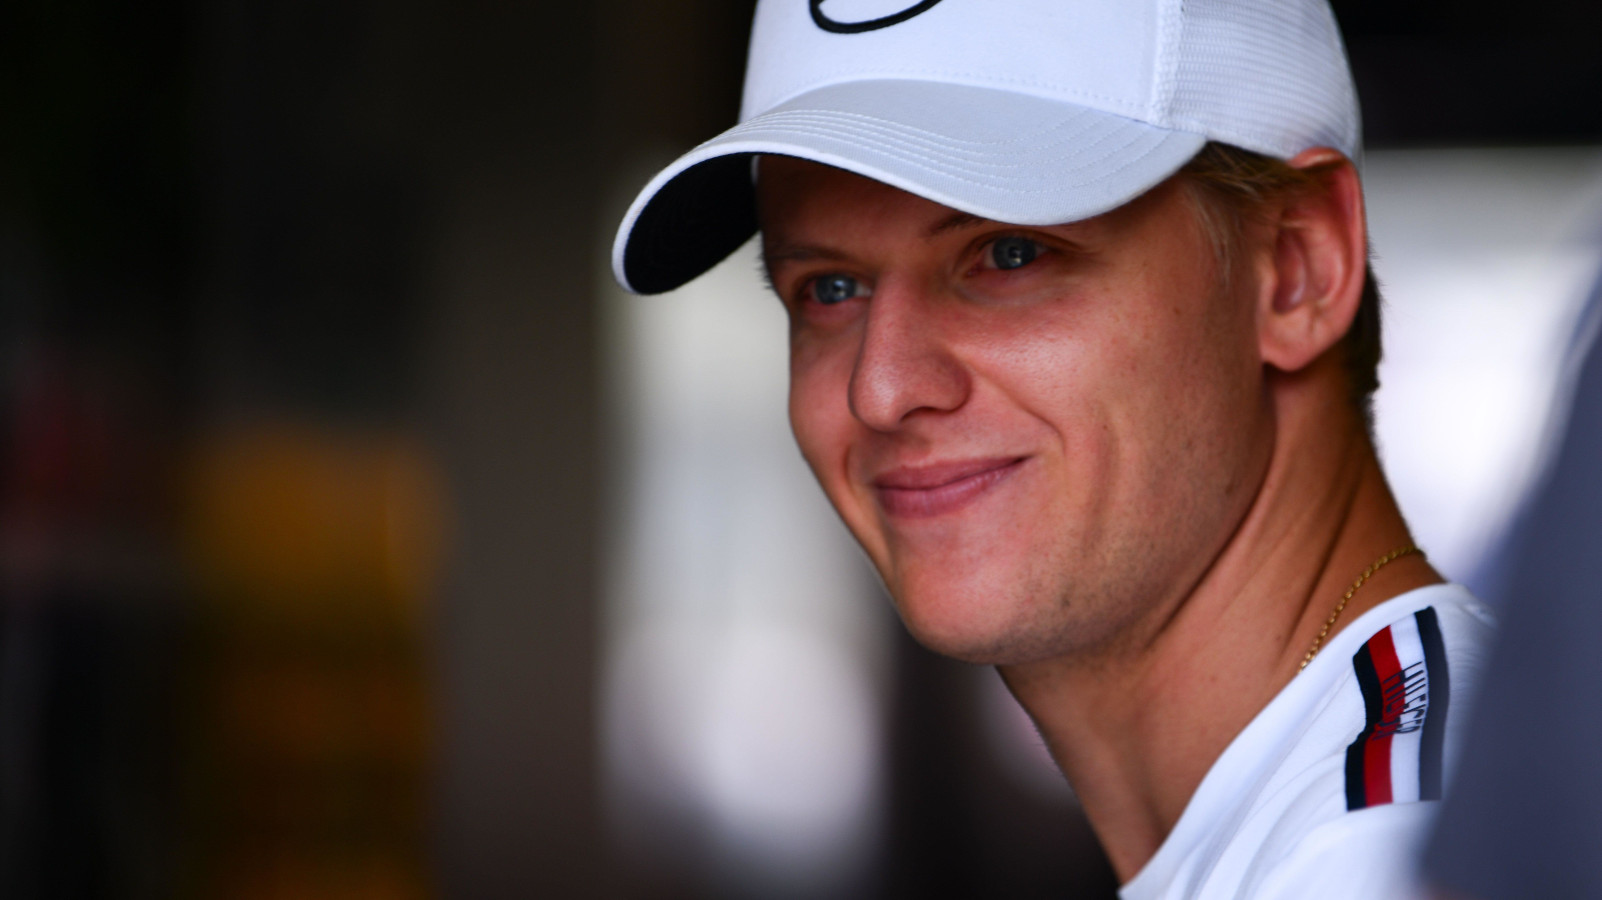 Mick Schumacher Officially Moves To Alpin To Compete In WEC